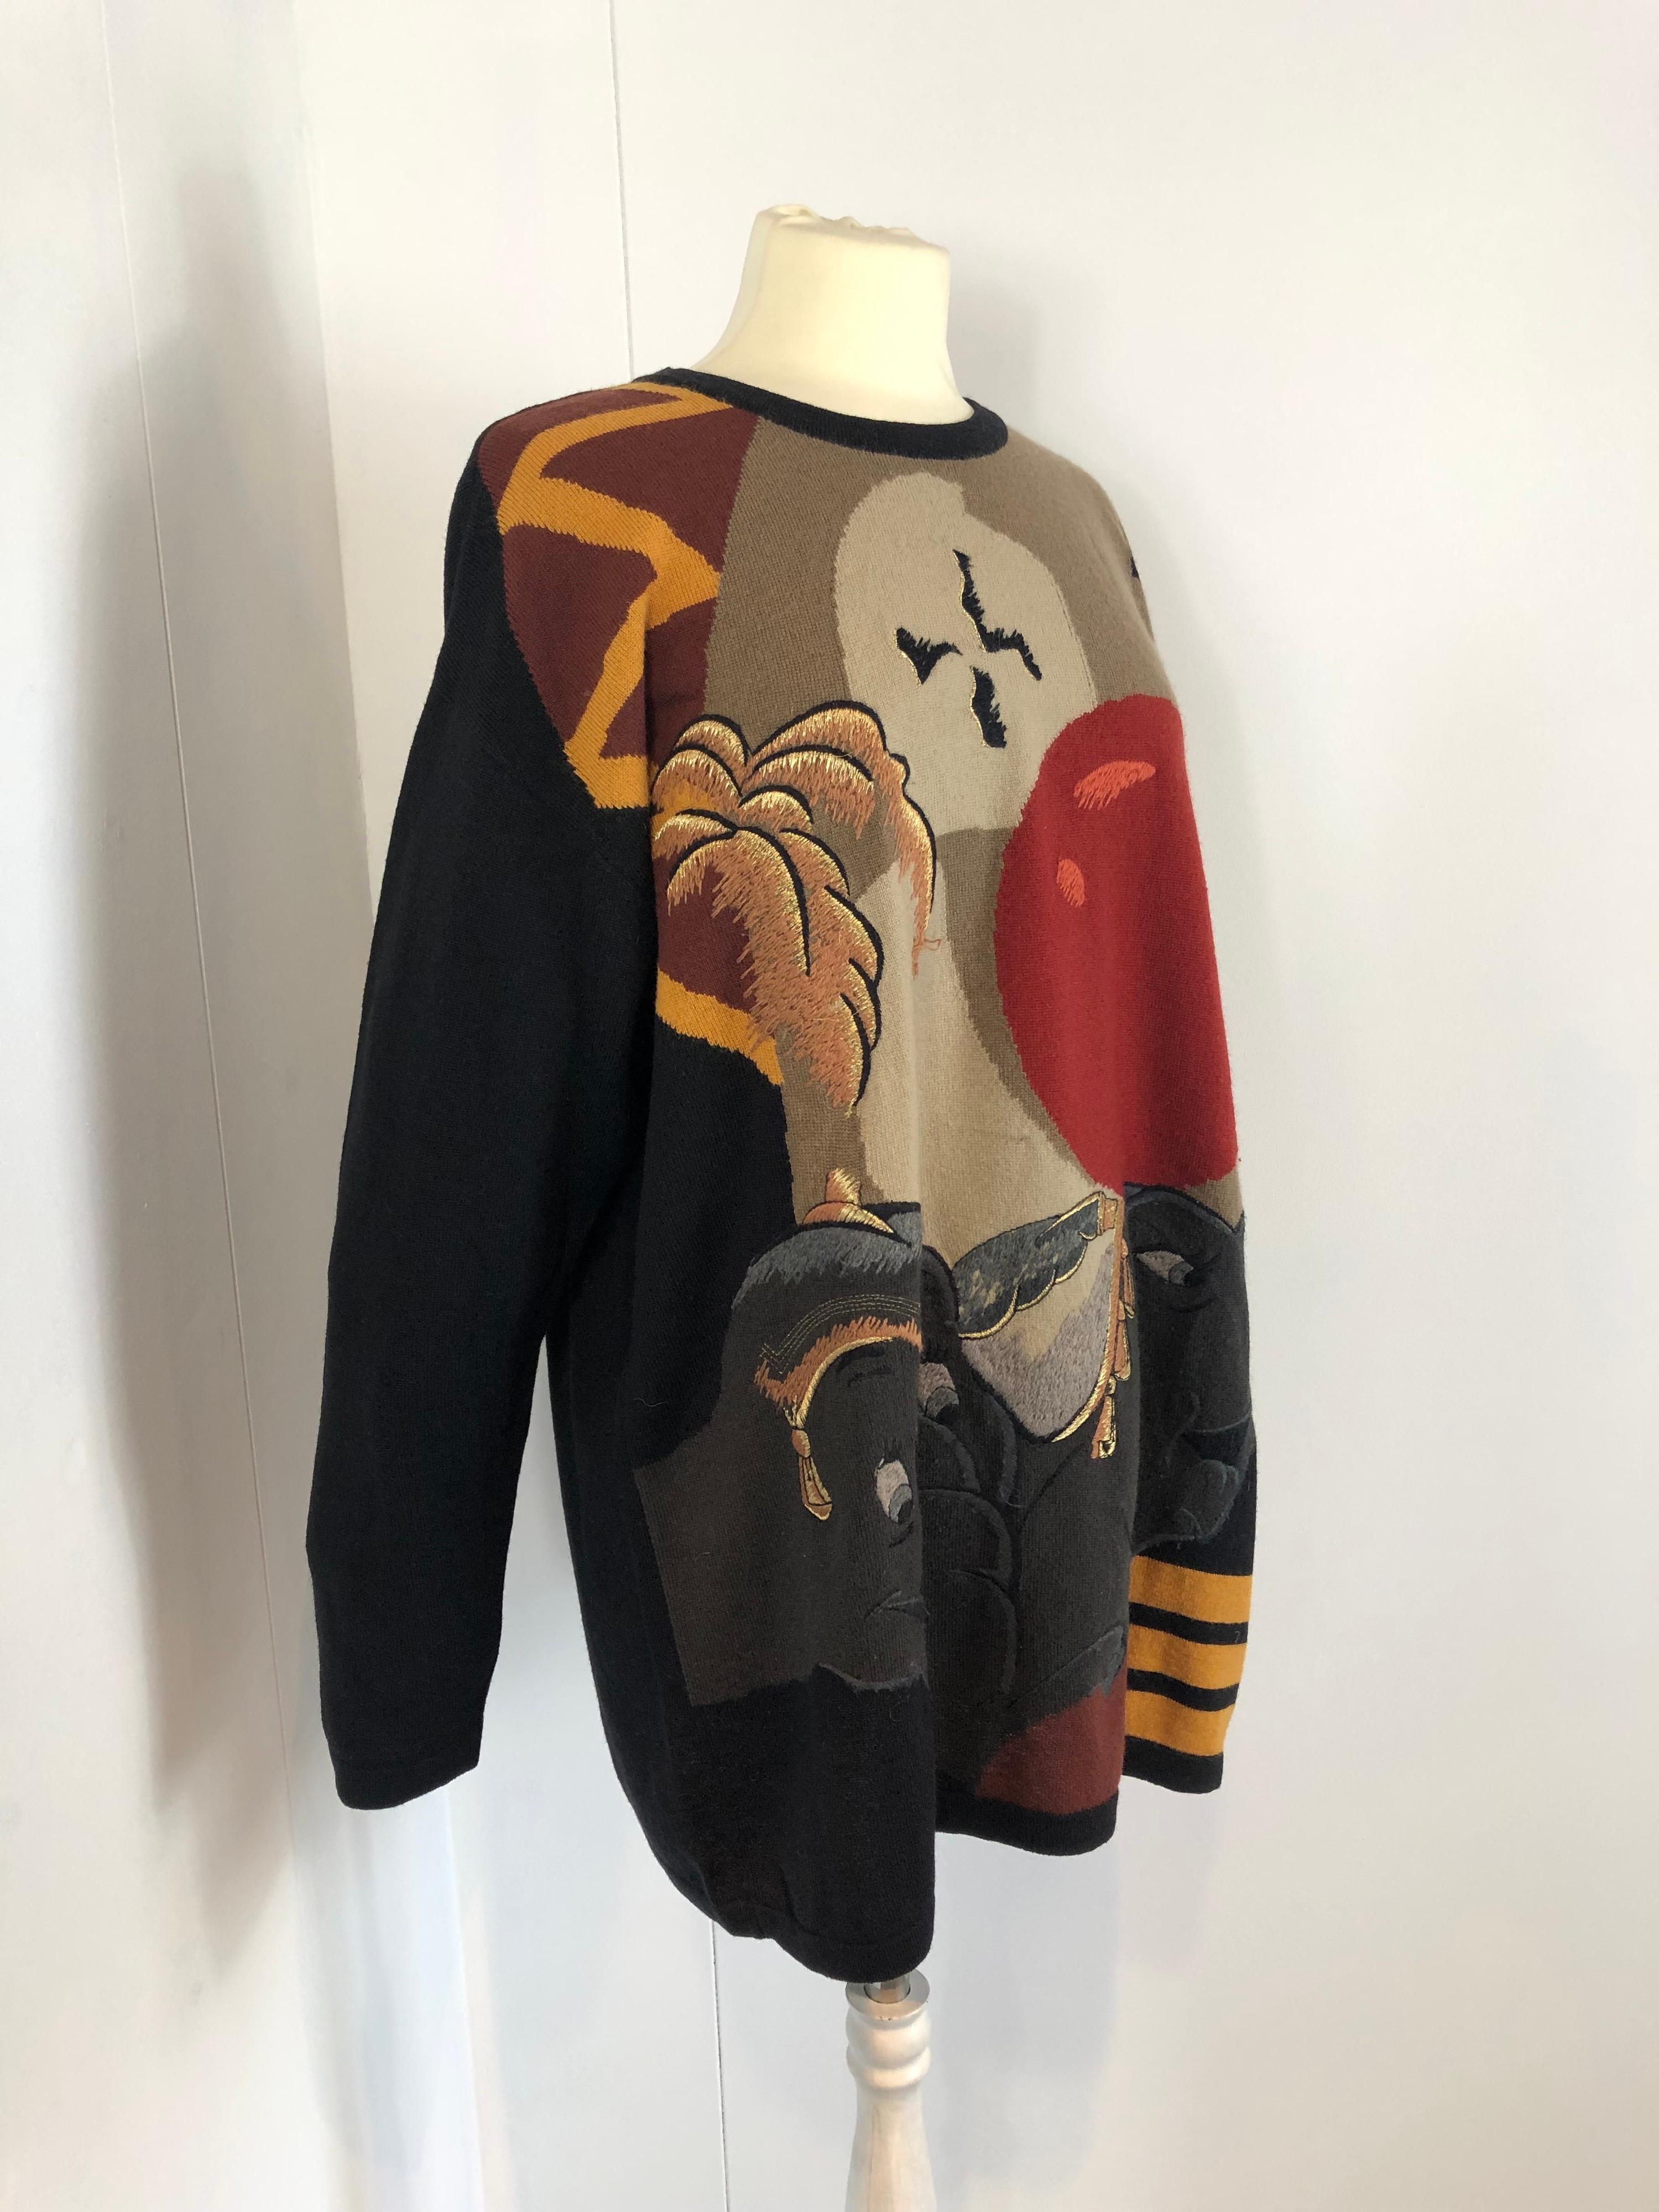 Iceberg jumper.
From iconic Disney collection presented during the 90s. Featuring Dumbo cartoon.
Fabrics is a mix between virgin wool & angora.
The size label is missing but it fits a 42 Italian.
Is very nice also styled